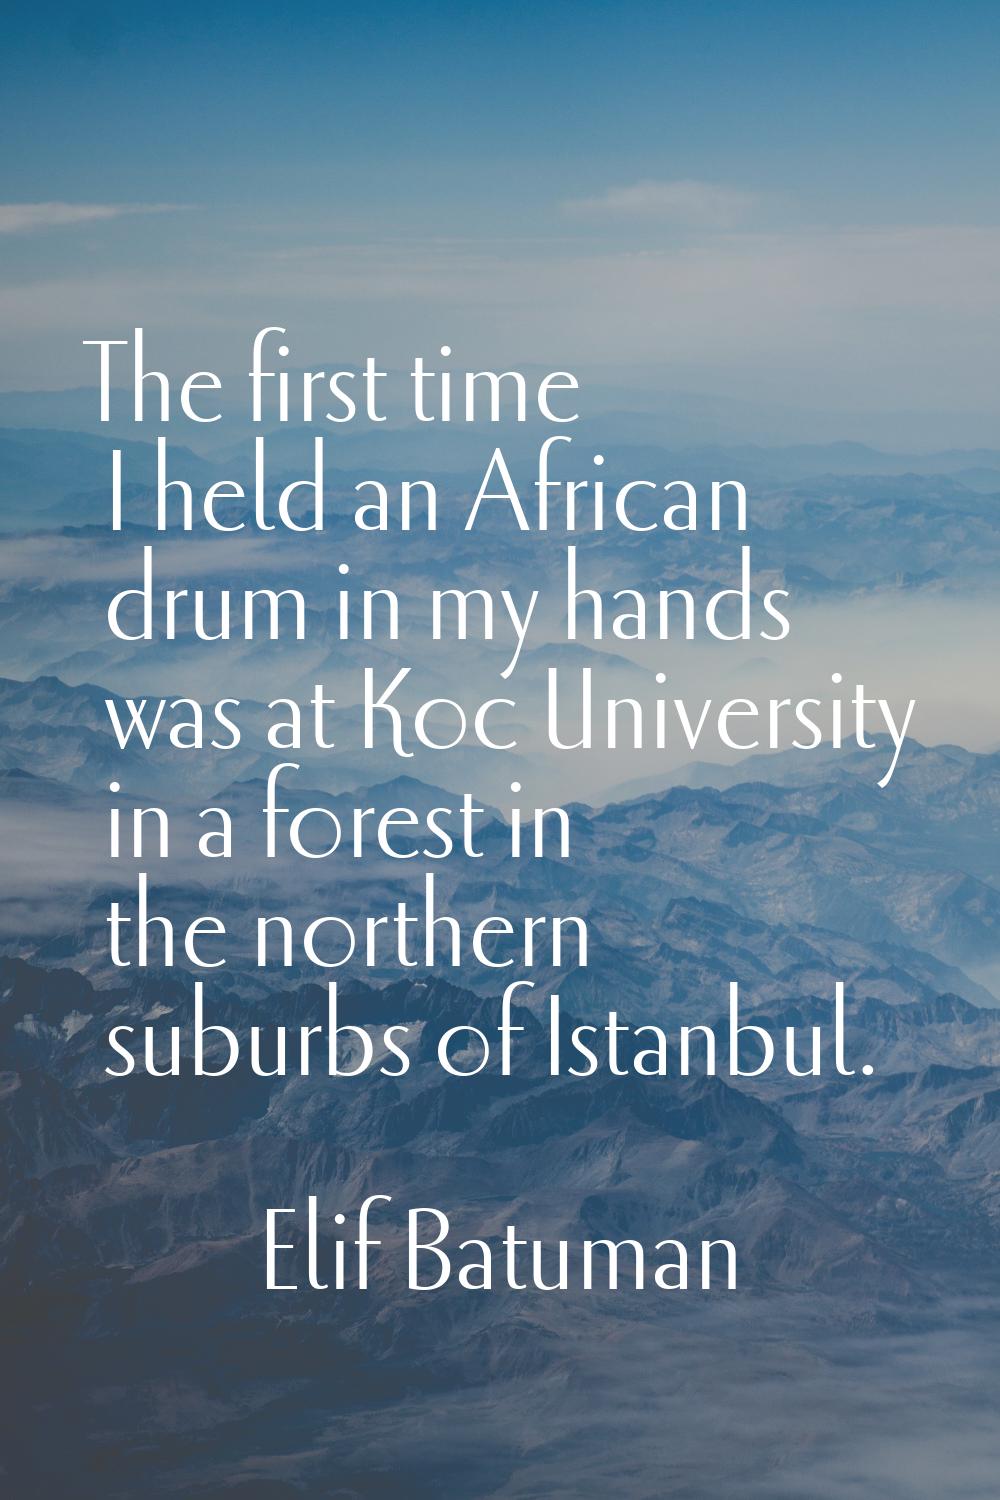 The first time I held an African drum in my hands was at Koc University in a forest in the northern